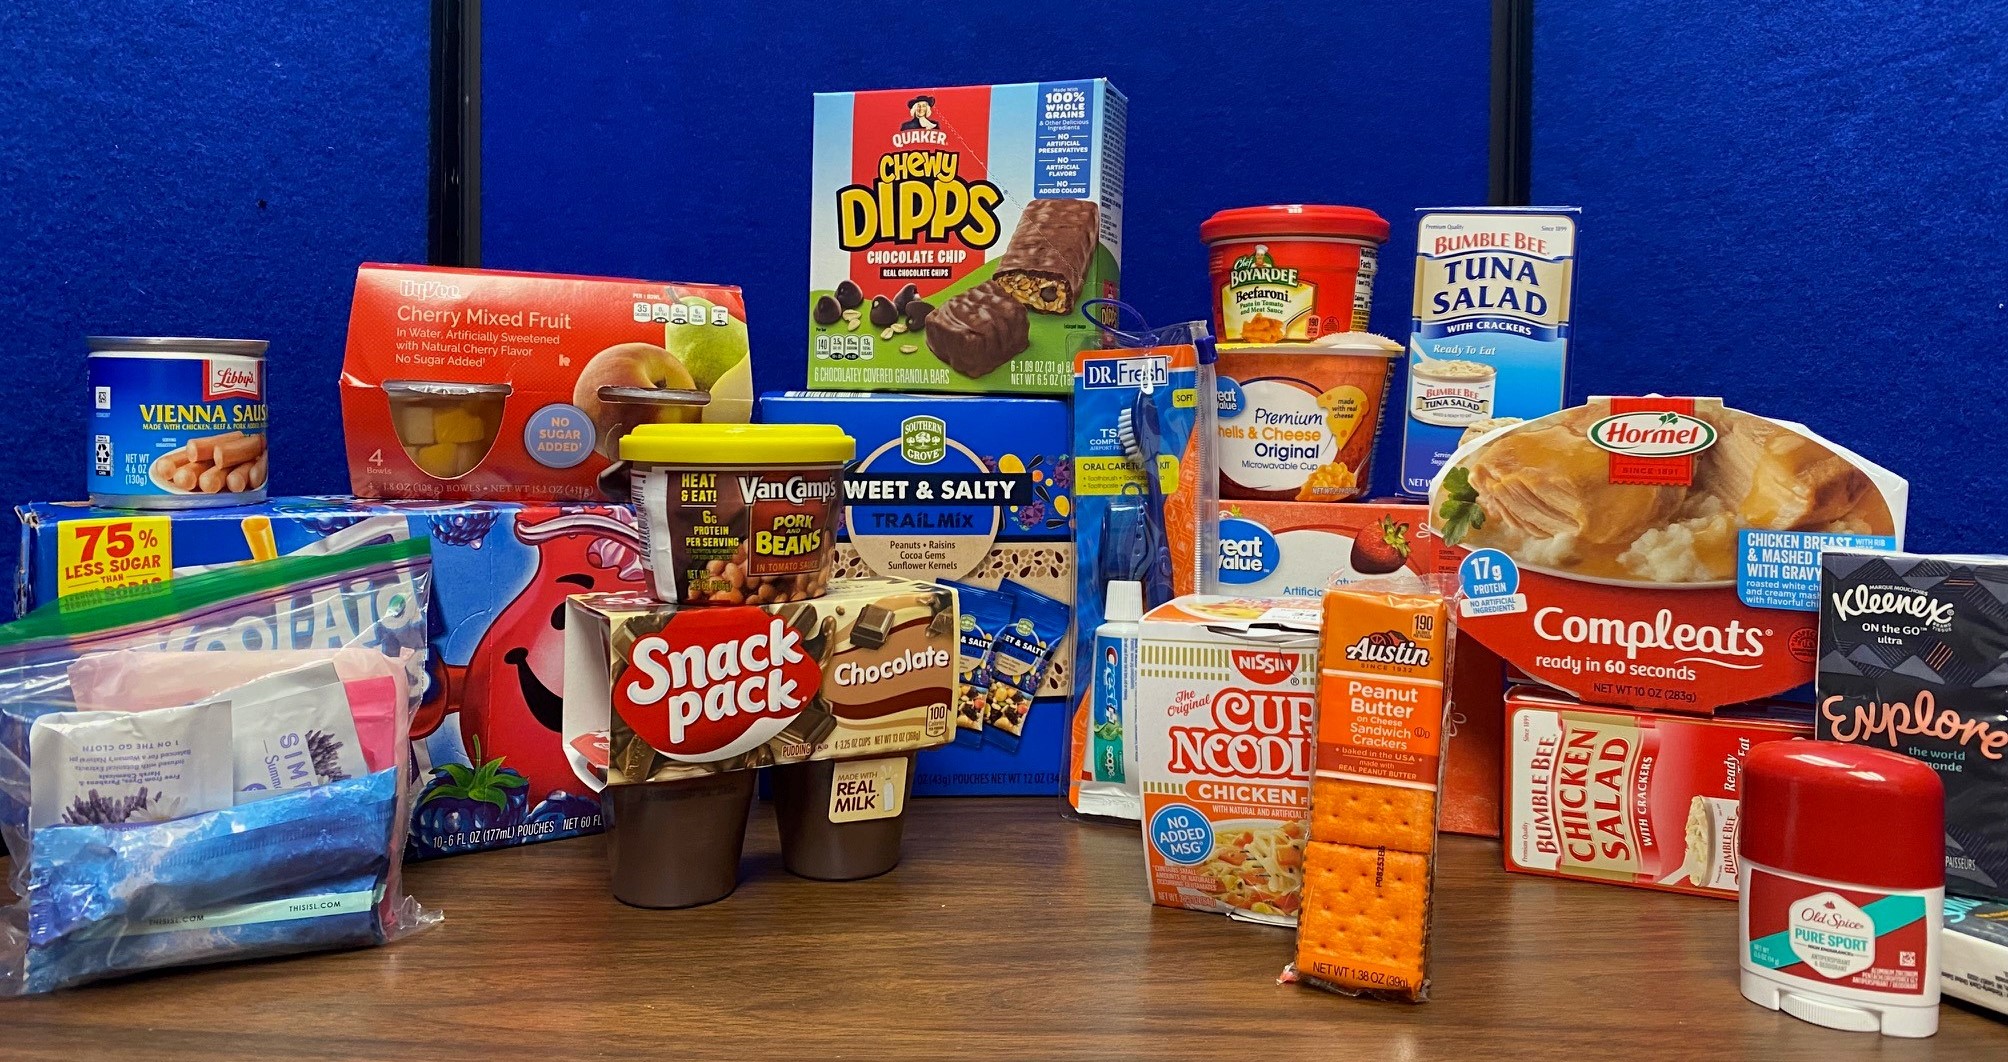 A photo of some of the popular items in the pantry including Vienna sausages, Snackpack pudding cups, chewy granola bars, tuna and chicken salad kits, kleenex, deodorant, toothpaste and toothbrush.